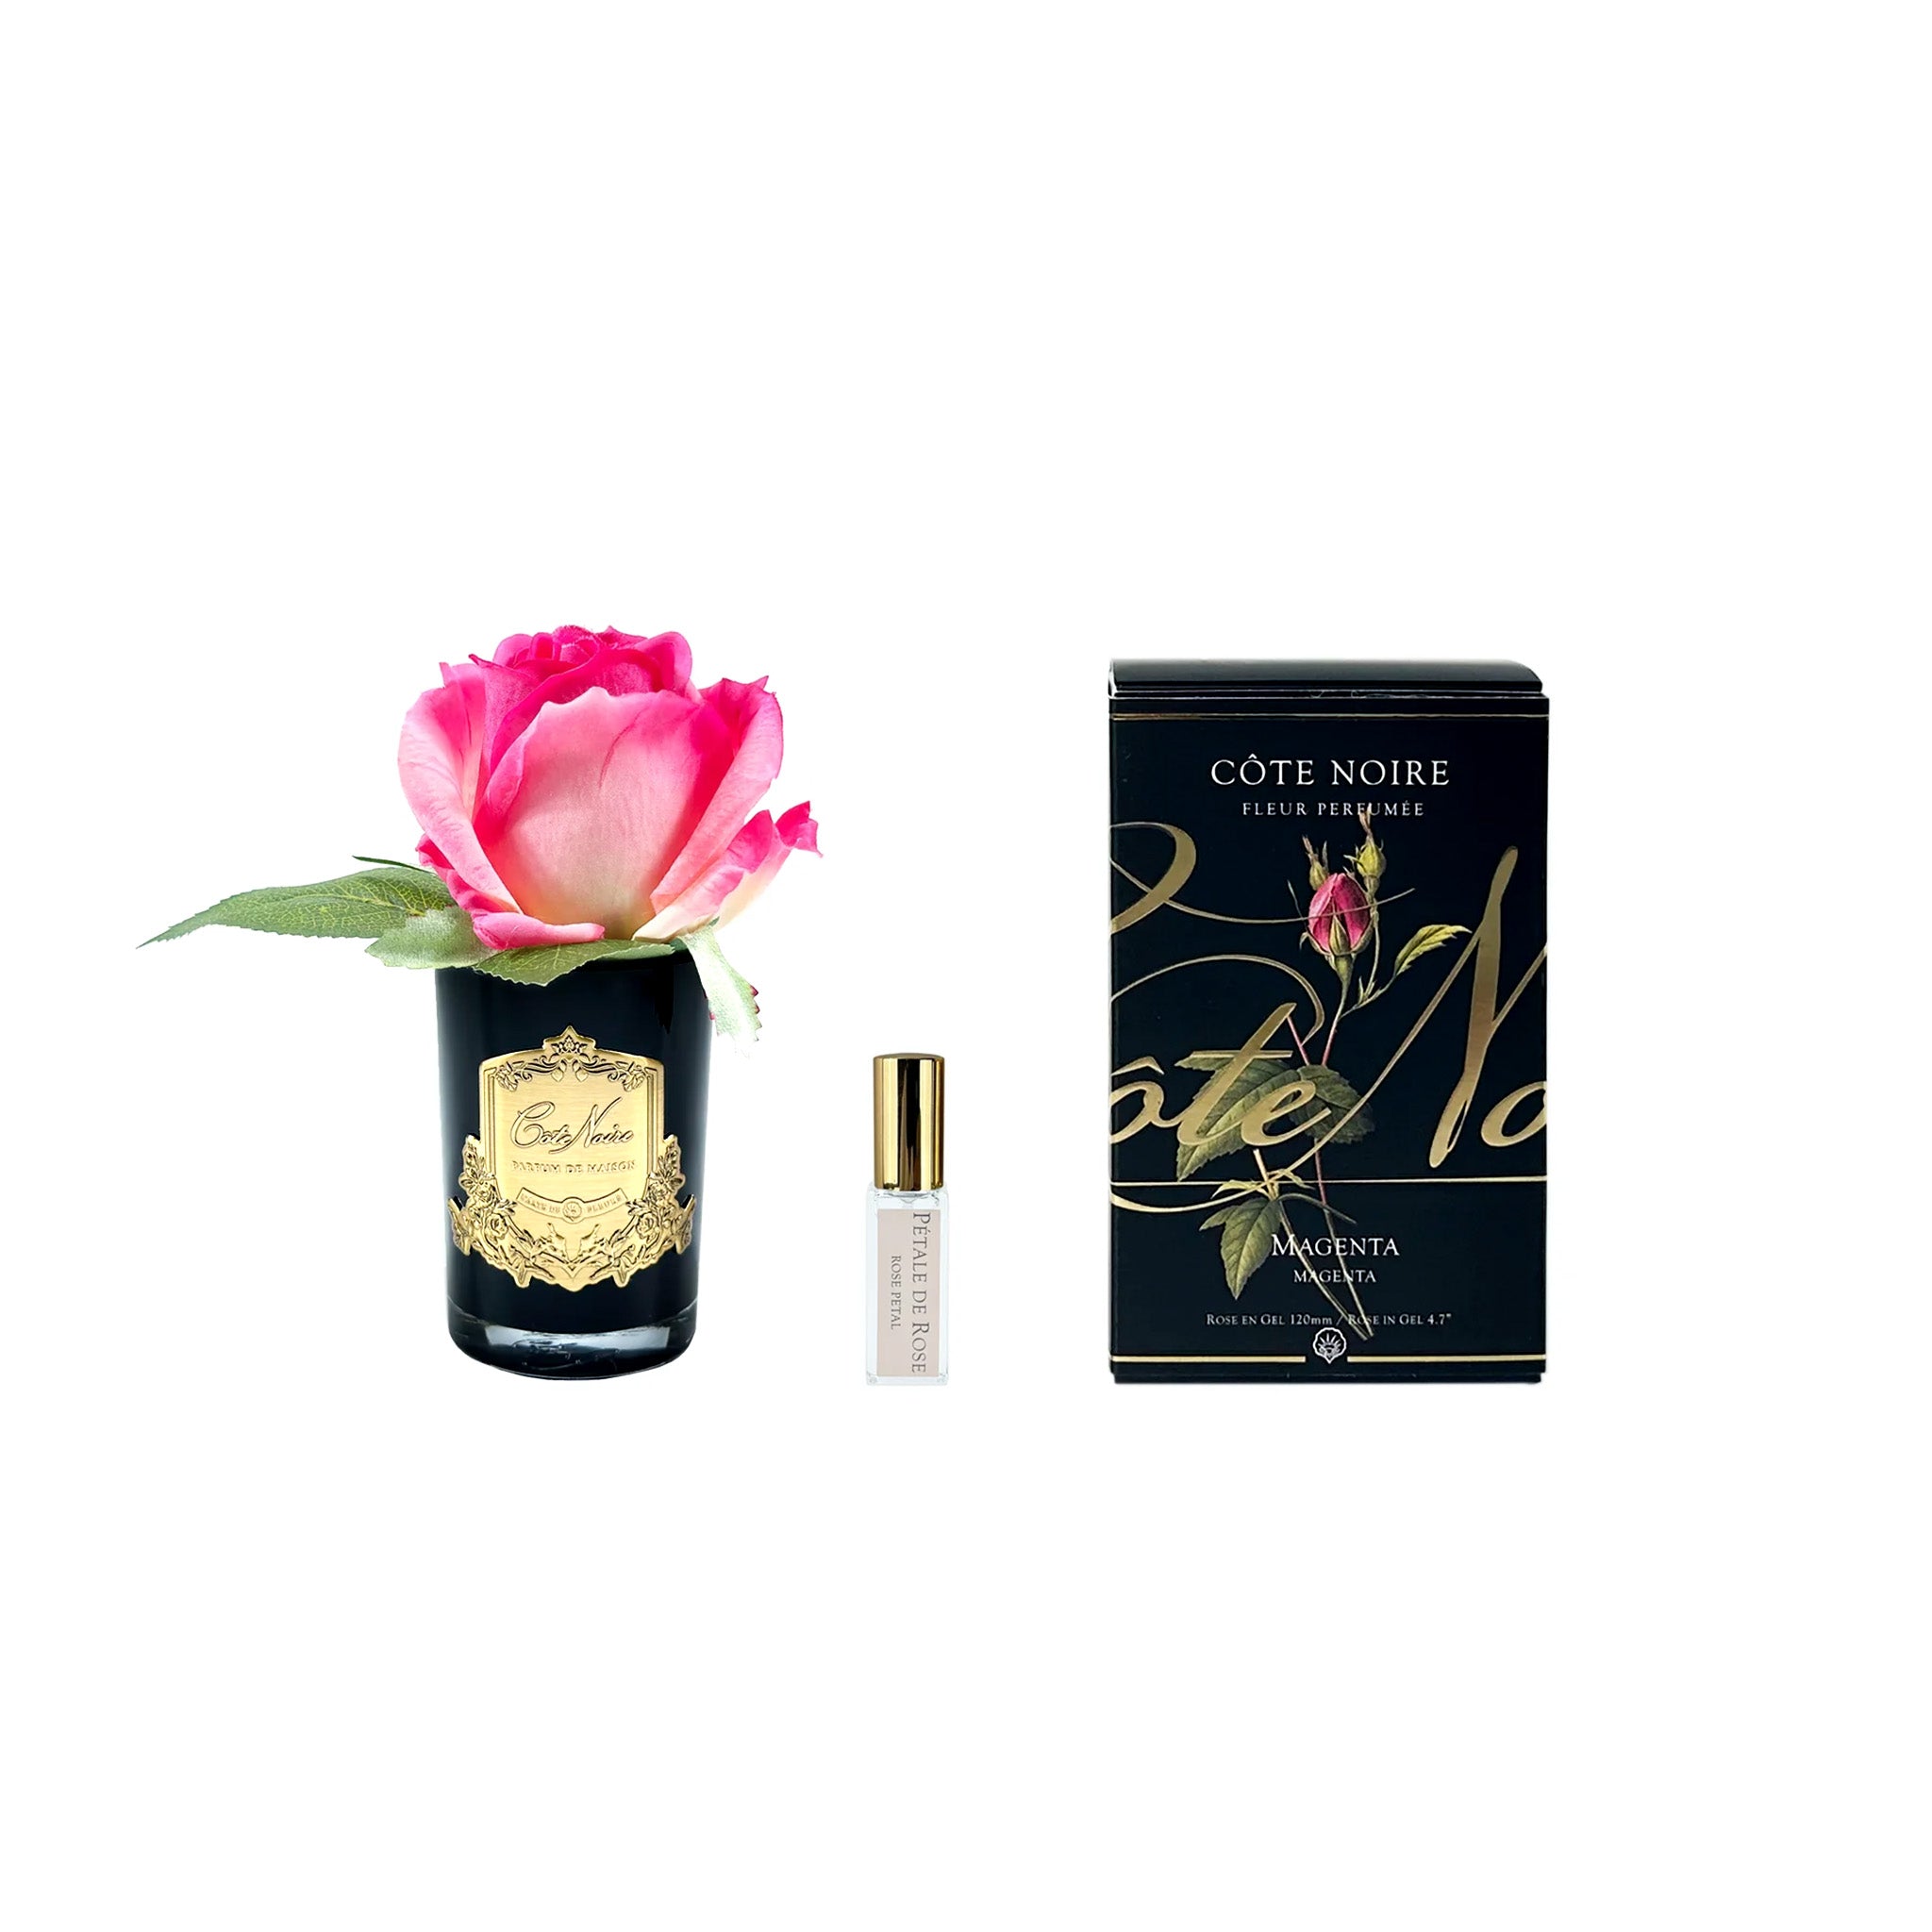 A magenta rosebud in a black vase with a gold emblem, near a delicate perfume vial and a box labeled 'CÔTE NOIRE, MAGENTA'